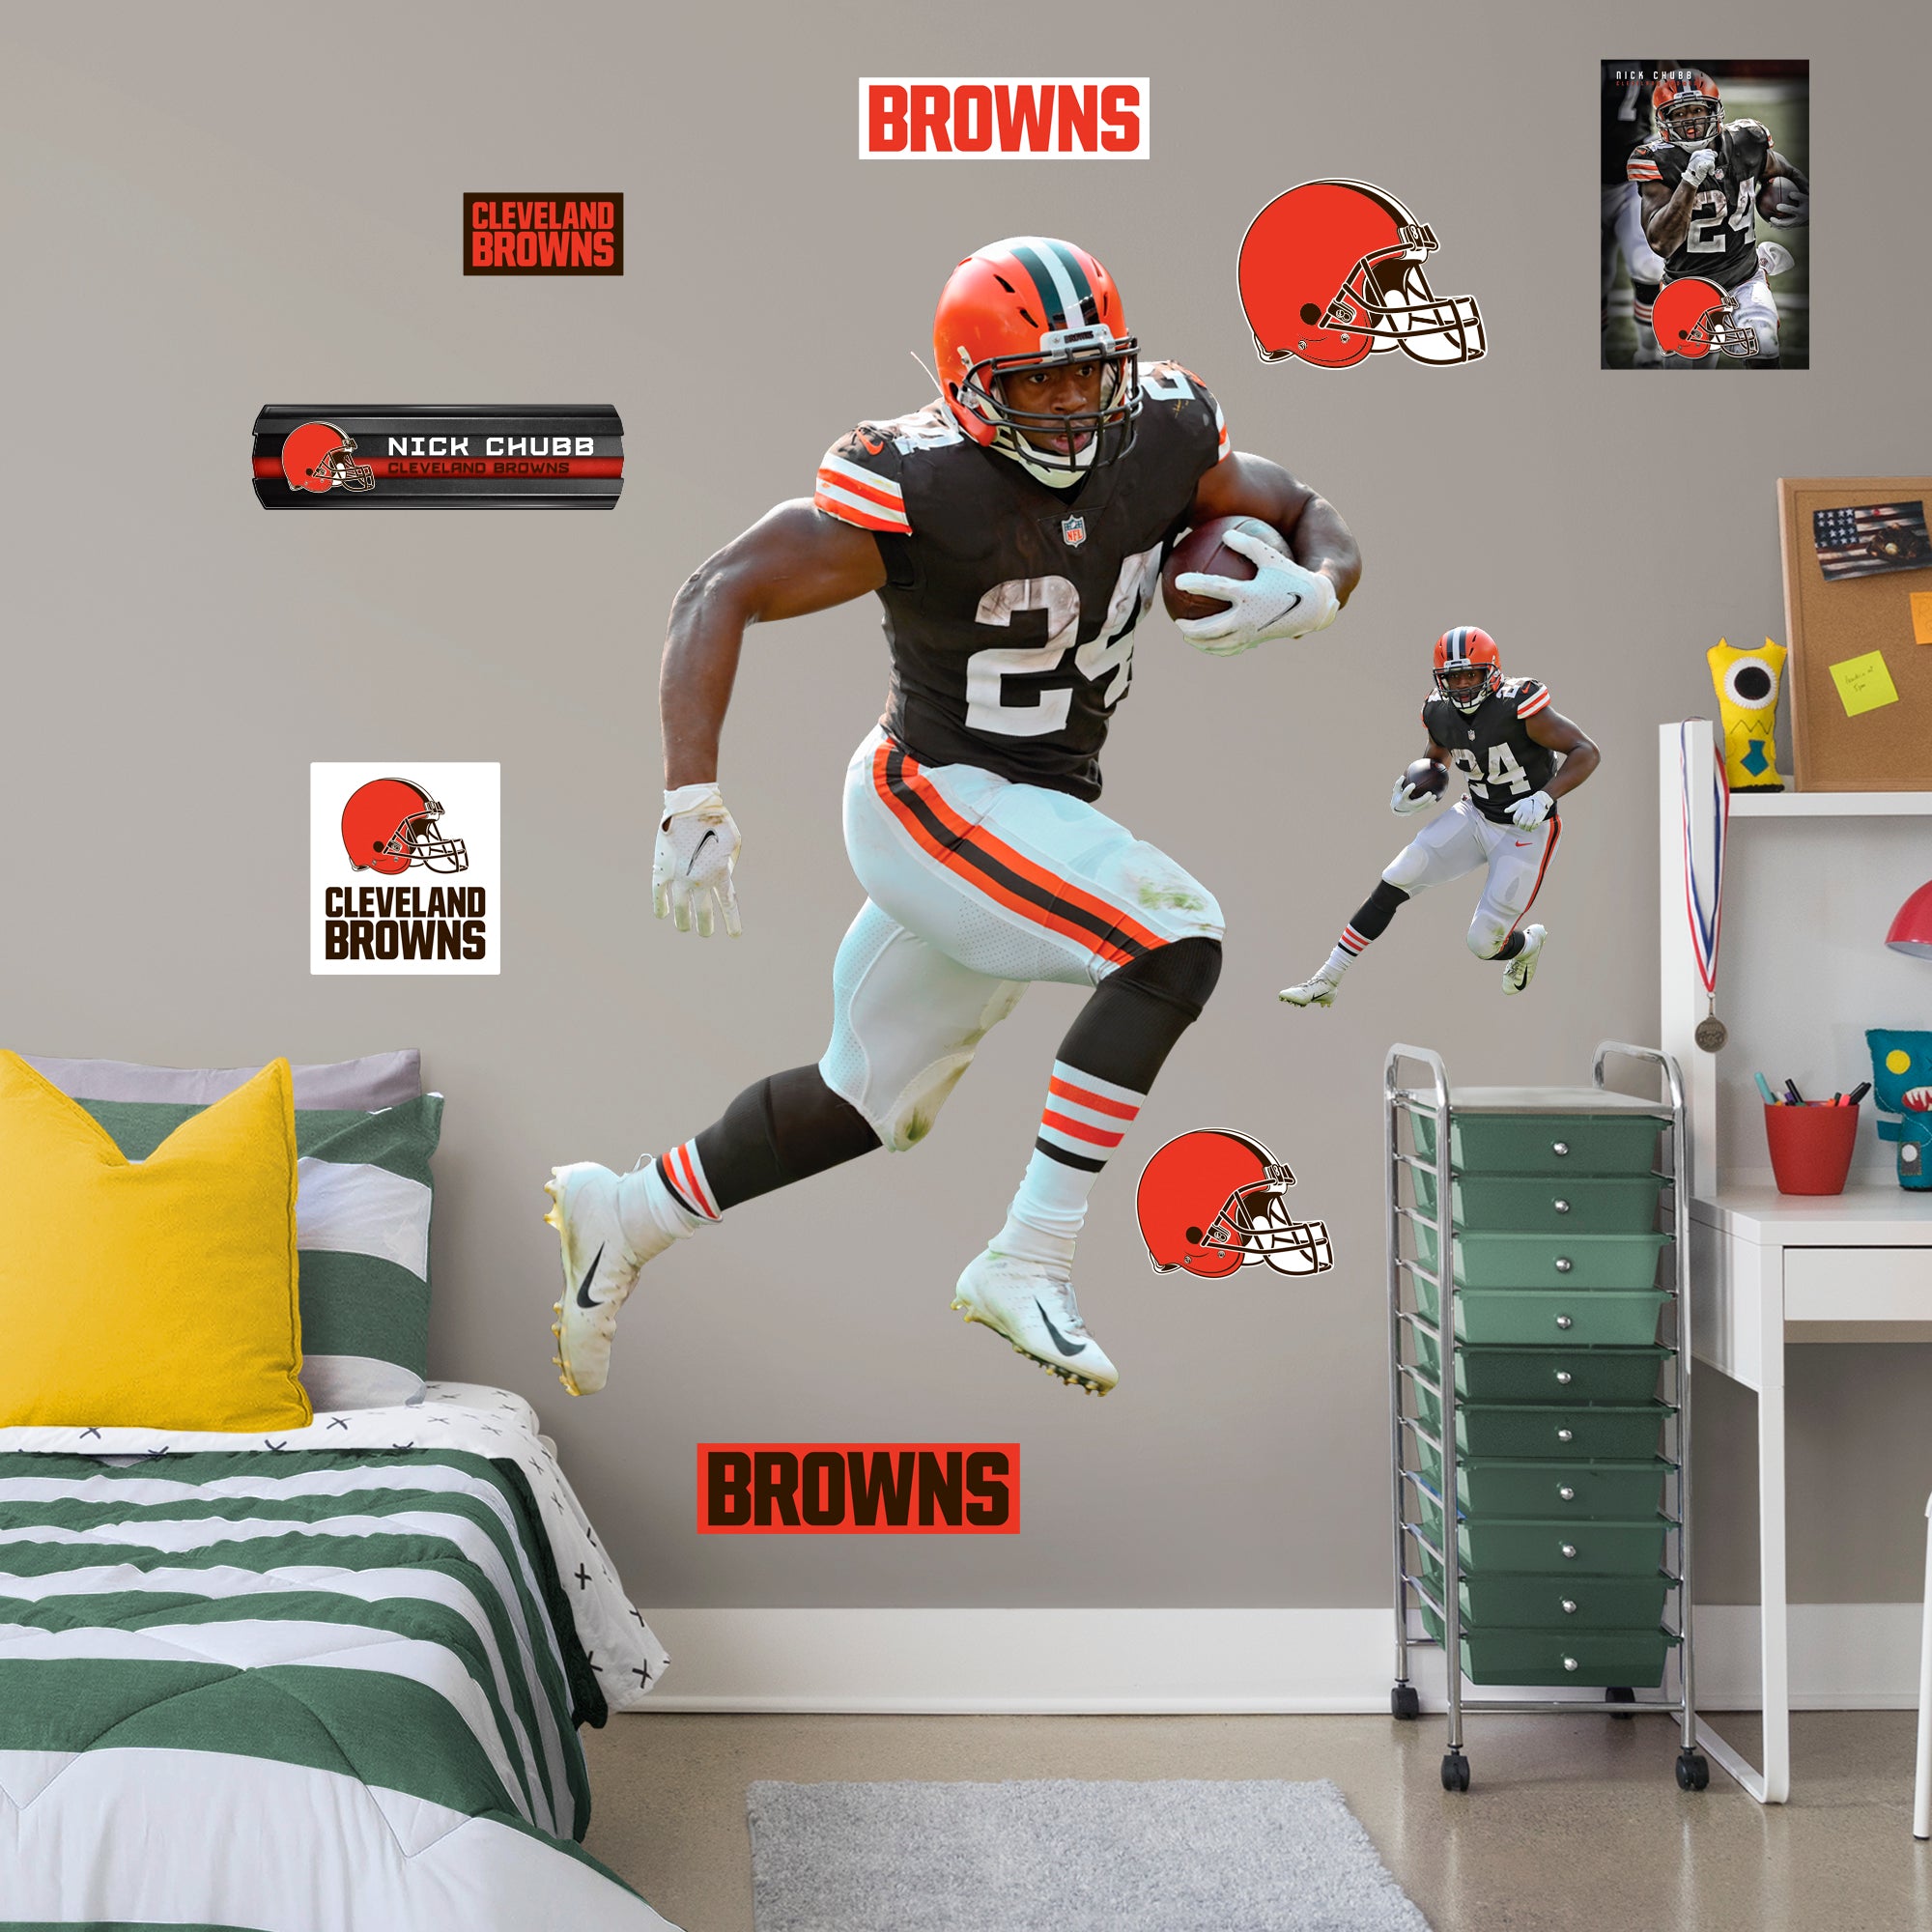 Nick Chubb 2020 - Officially Licensed NFL Removable Wall Decal Giant Athlete + 2 Decals by Fathead | Vinyl